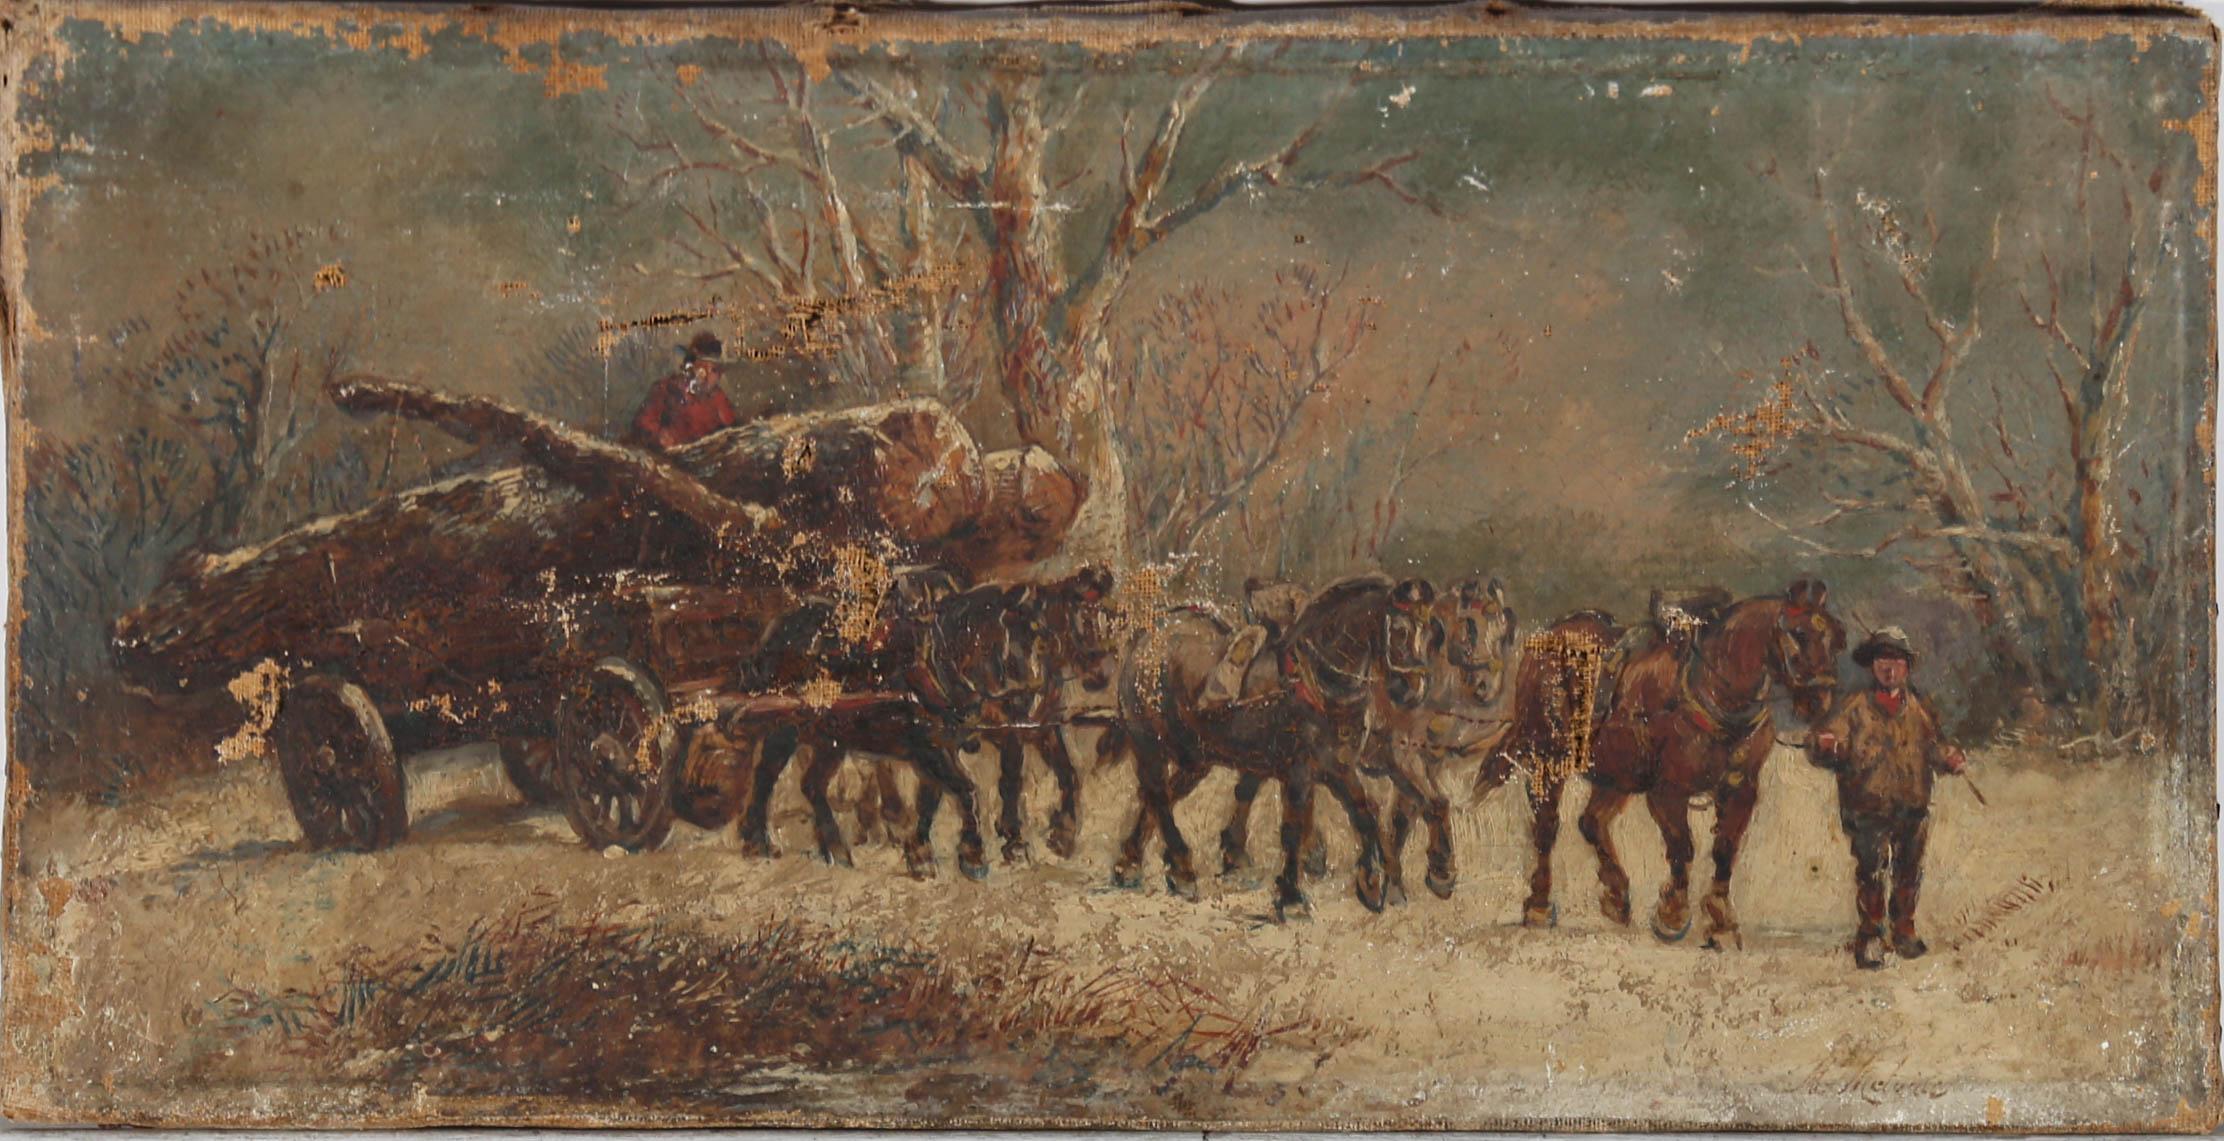 Selling for restoration- This charming pair of naive landscape scenes from the 19th century period. The first depicts a heavy logging wagon in a winter woodland, and the second similar; a covered wagon with figures. Signed, H. S. Melville. Both oils